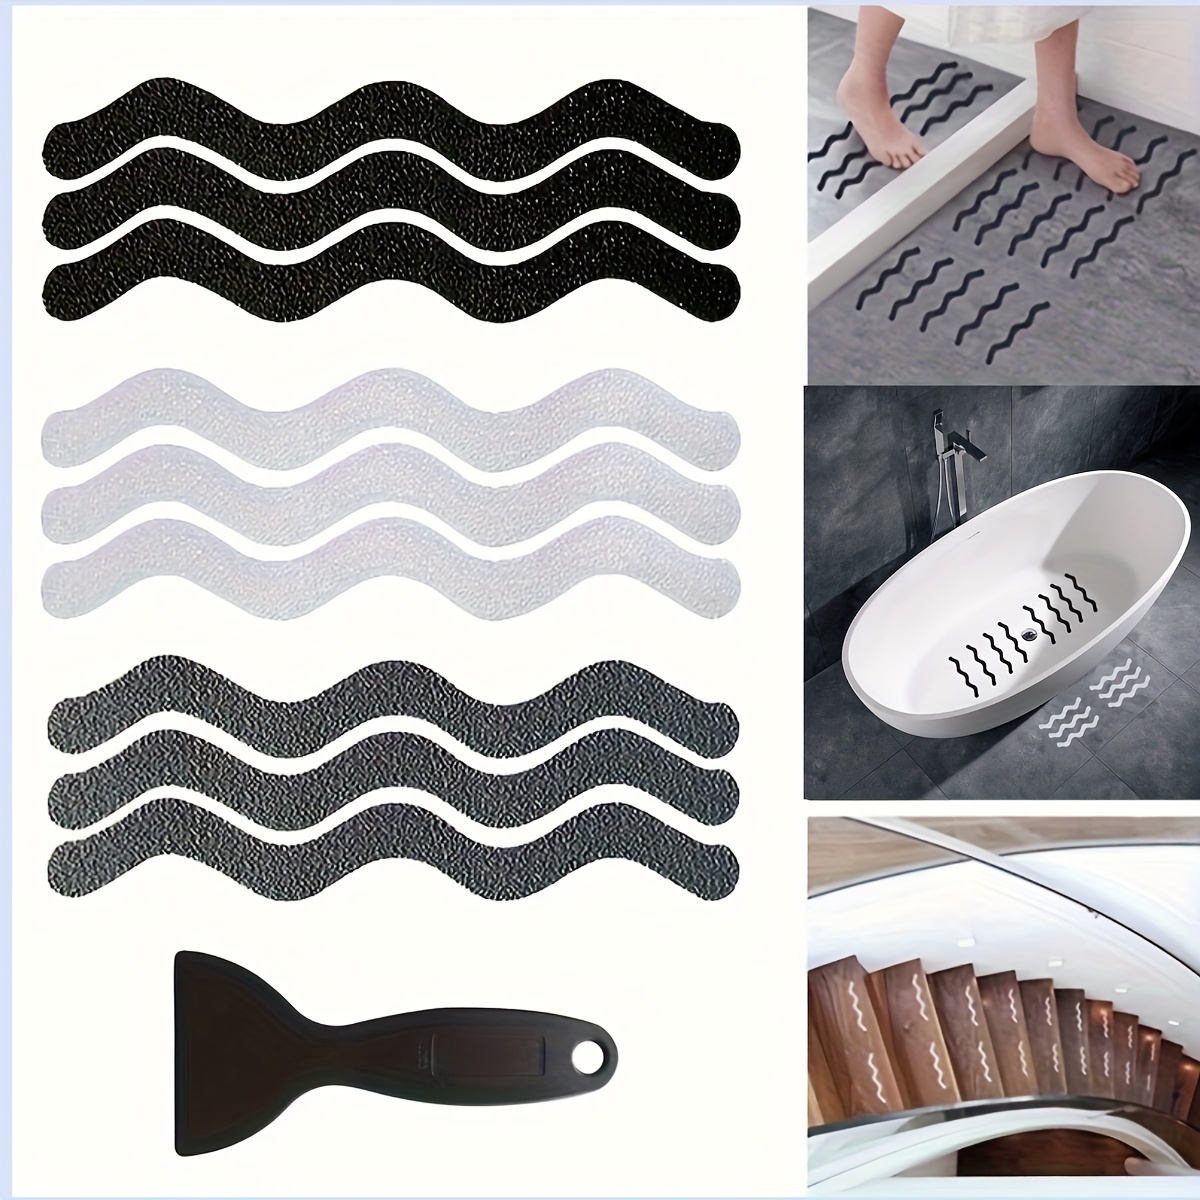 

24pcs Bathroom Tub Anti-slip Stickers S-shaped Wave Shaped Tub Strip Decals With Scraper For Tub Shower Stair Ladder